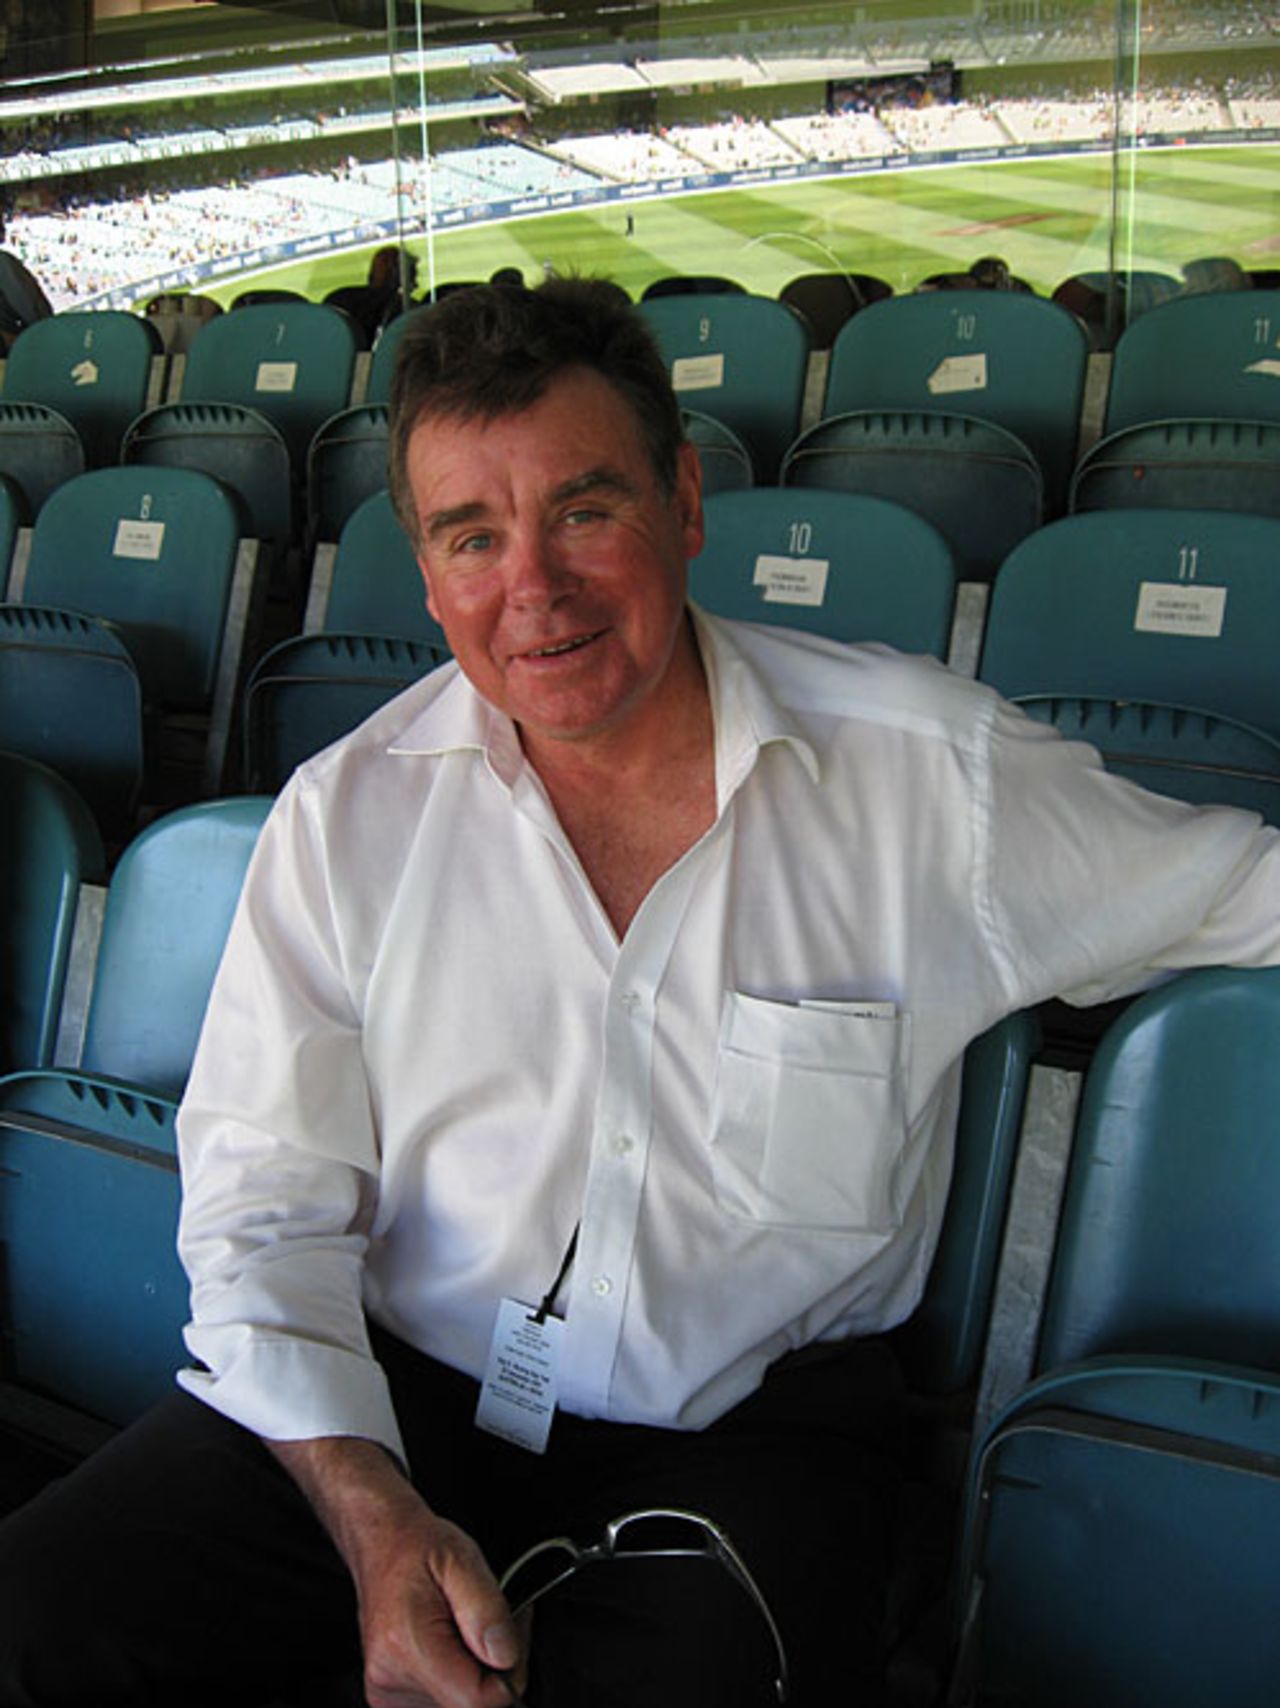 Jim Higgs at the MCG during the first Test between Australia and India, December 29, 2007